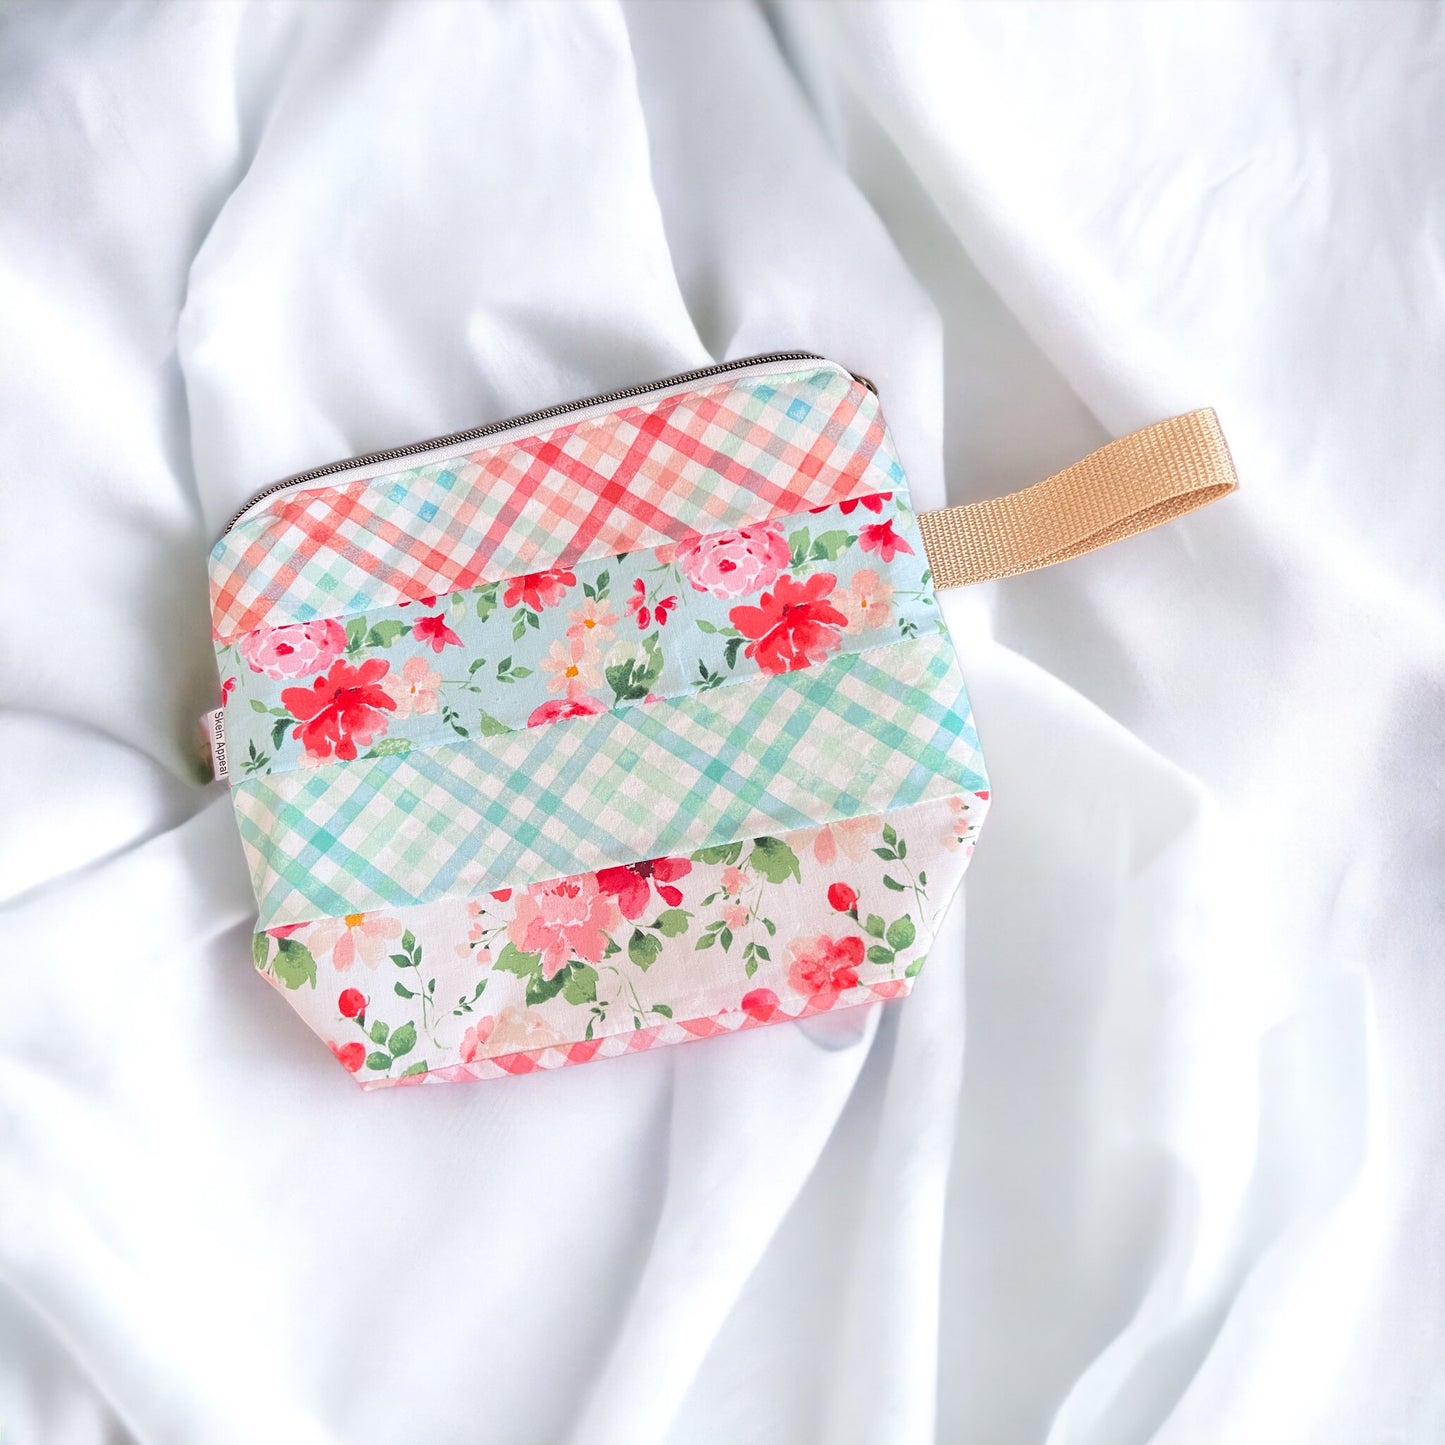 Small Patchwork Project Bag-Floral